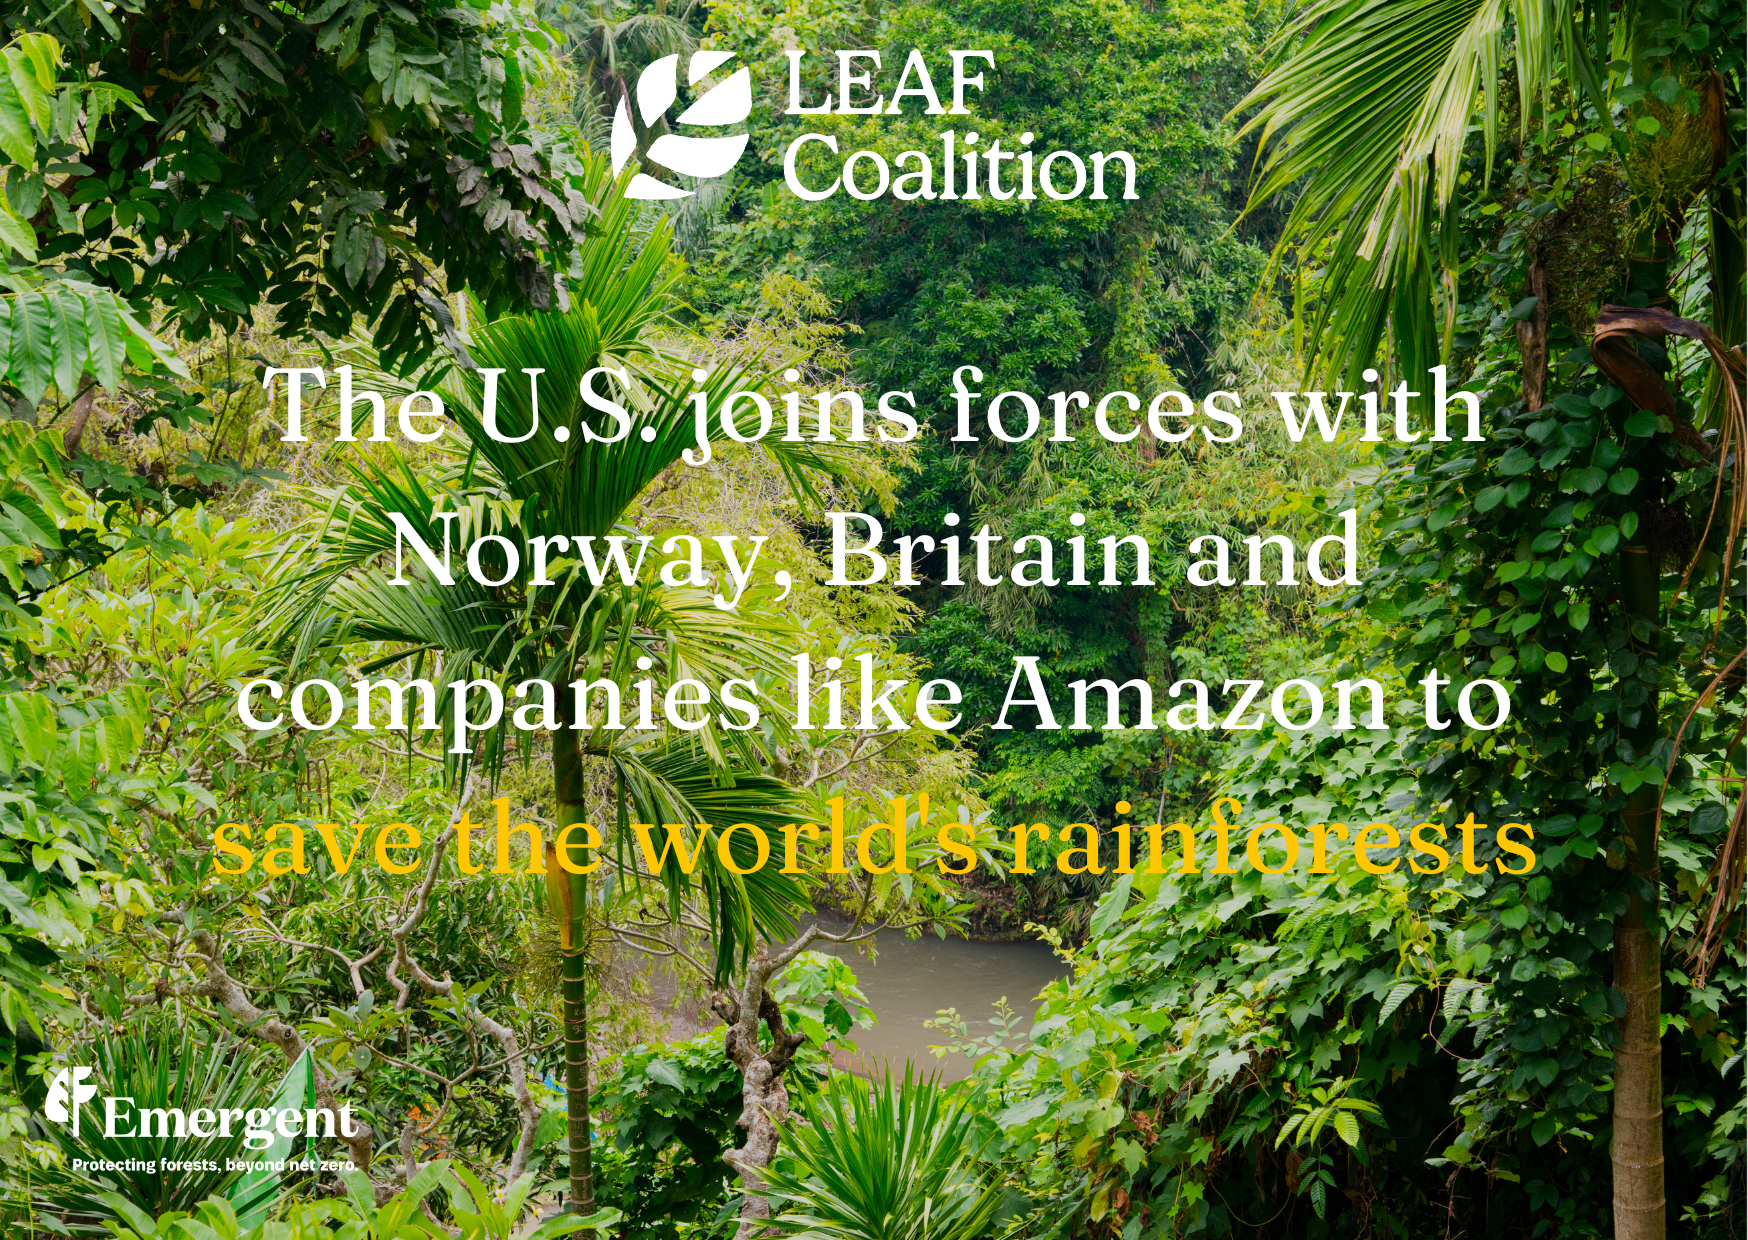 The U.S. joins forces with Norway, Britain and companies like Amazon to save the world's rainforests